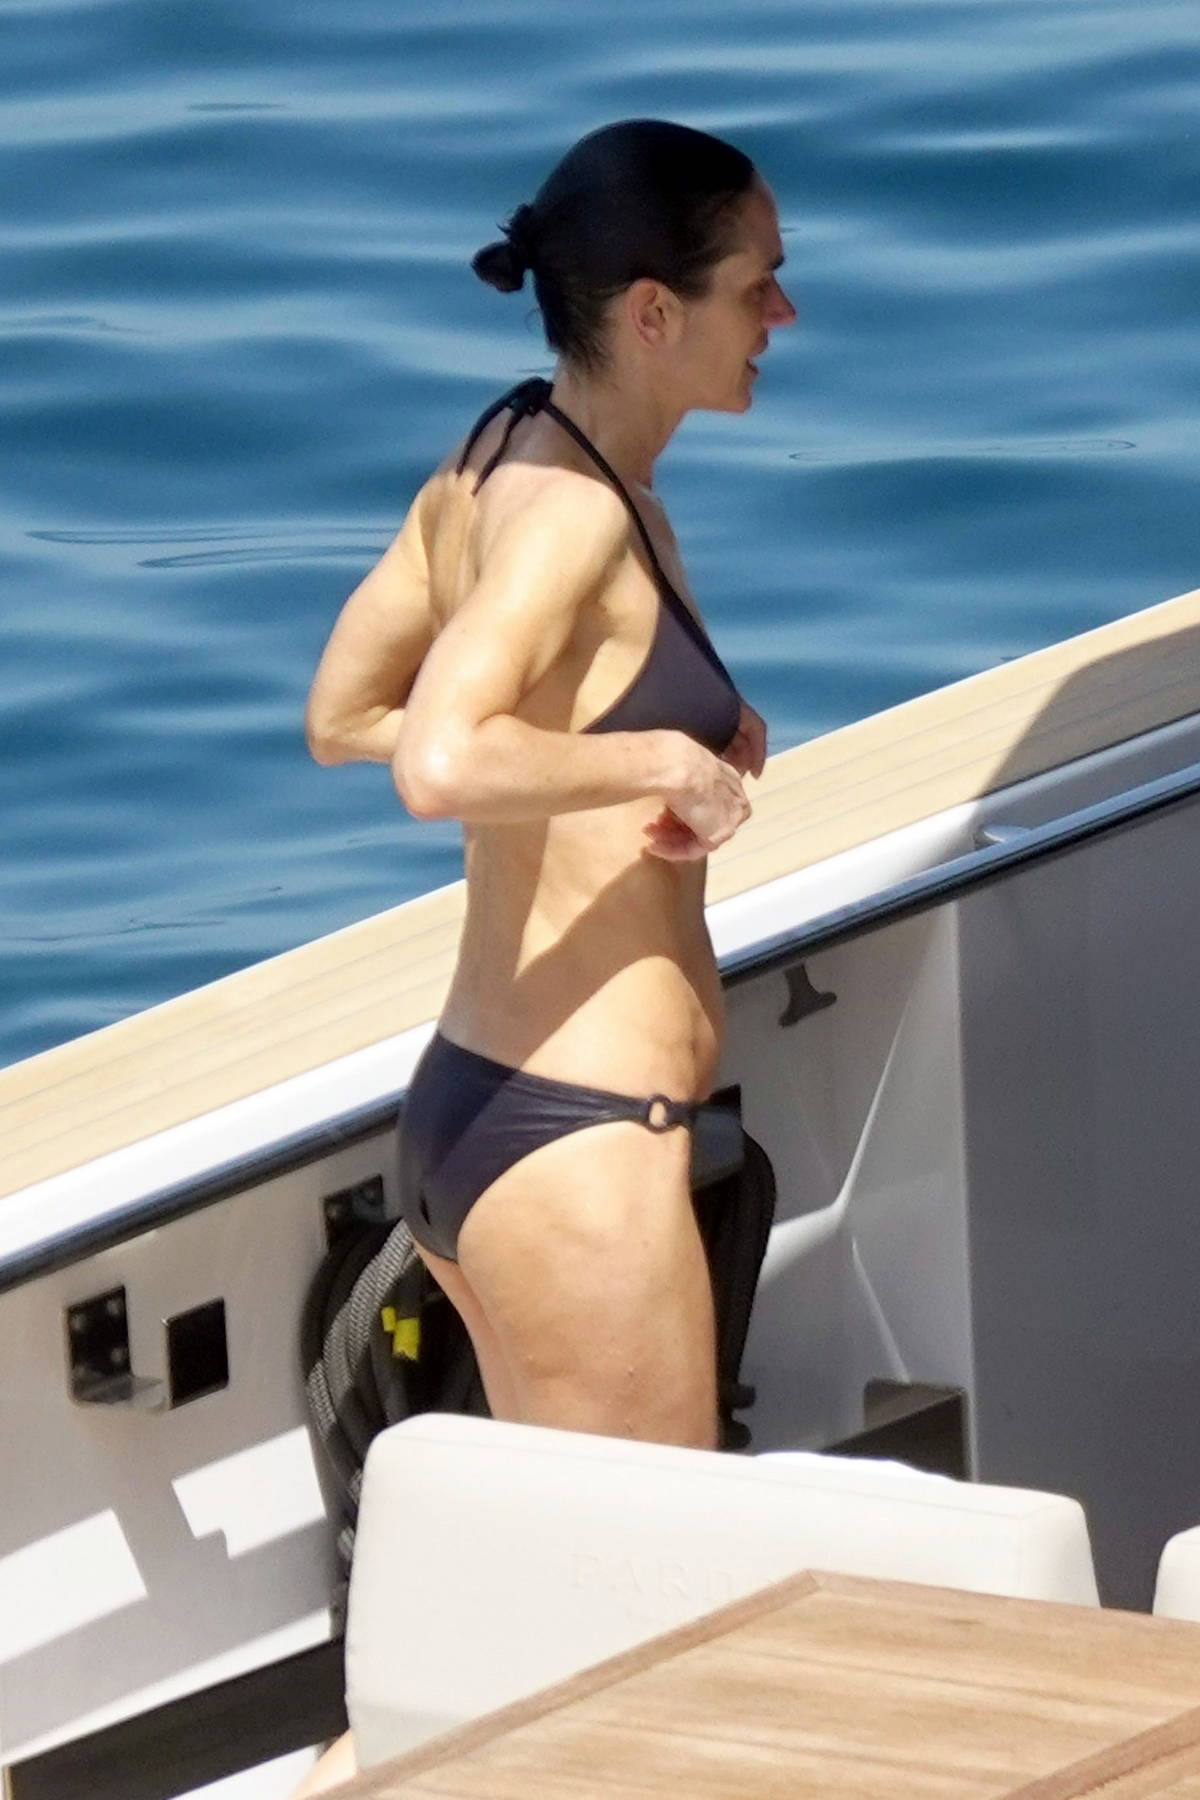 Jennifer Connelly, 52, joins her shirtless husband Paul Bettany on a yacht  in Capri